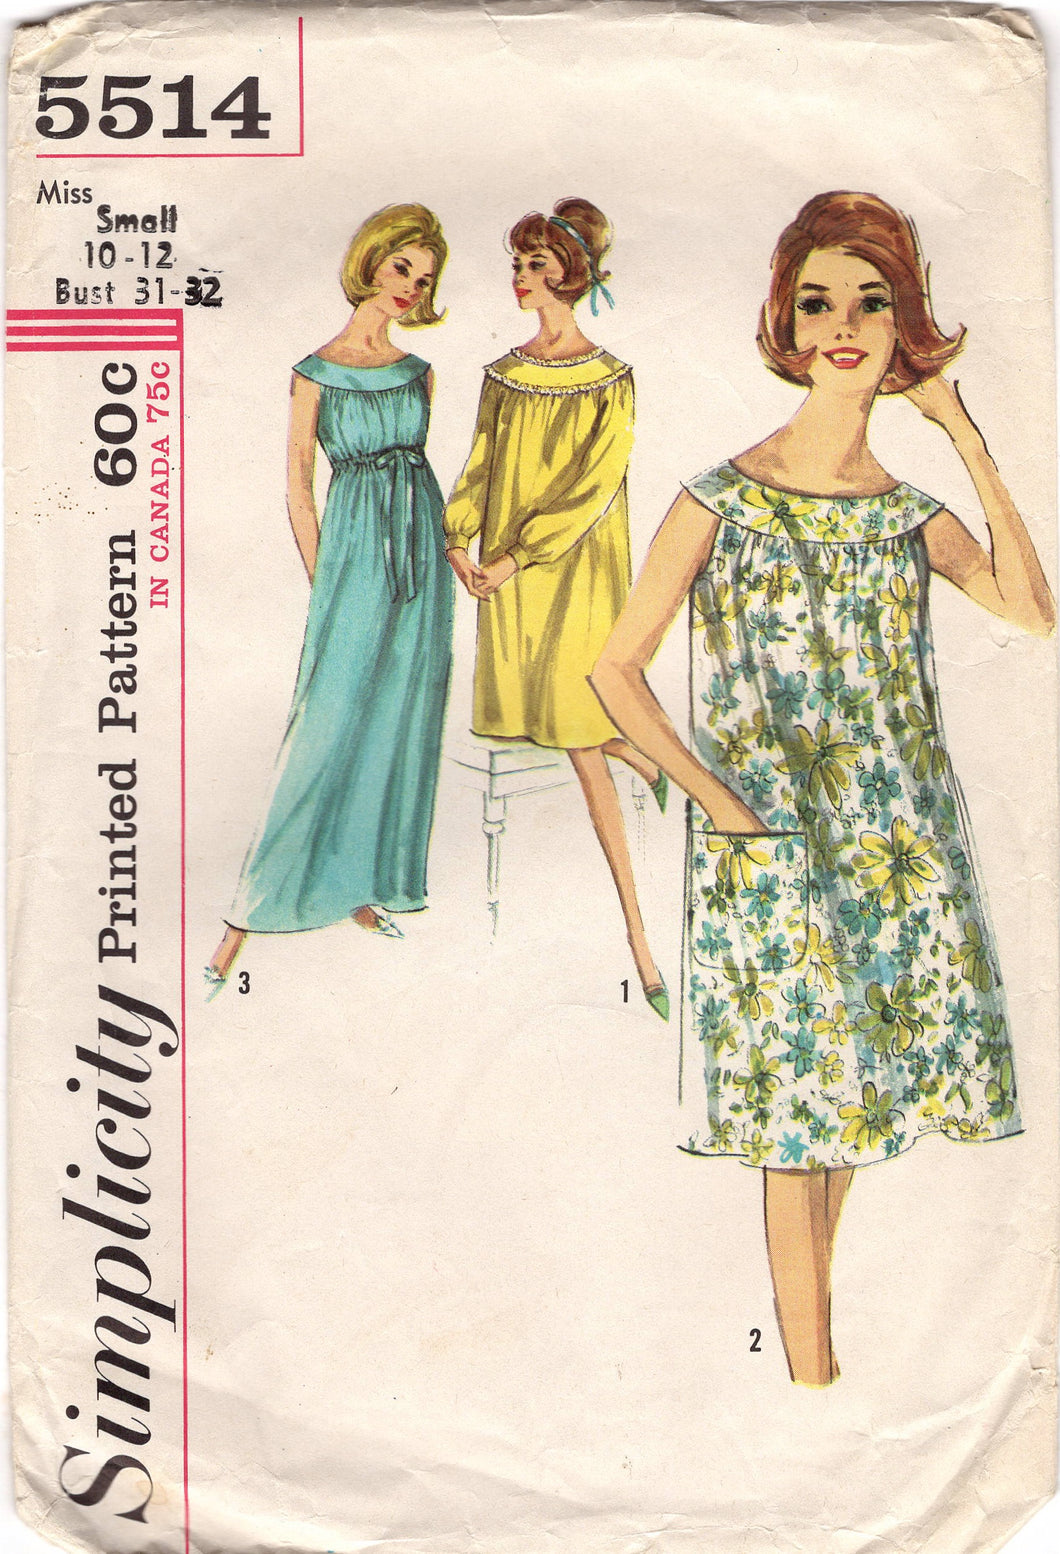 1960's Simplicity Yoked Nightgown pattern - Bust 31-32